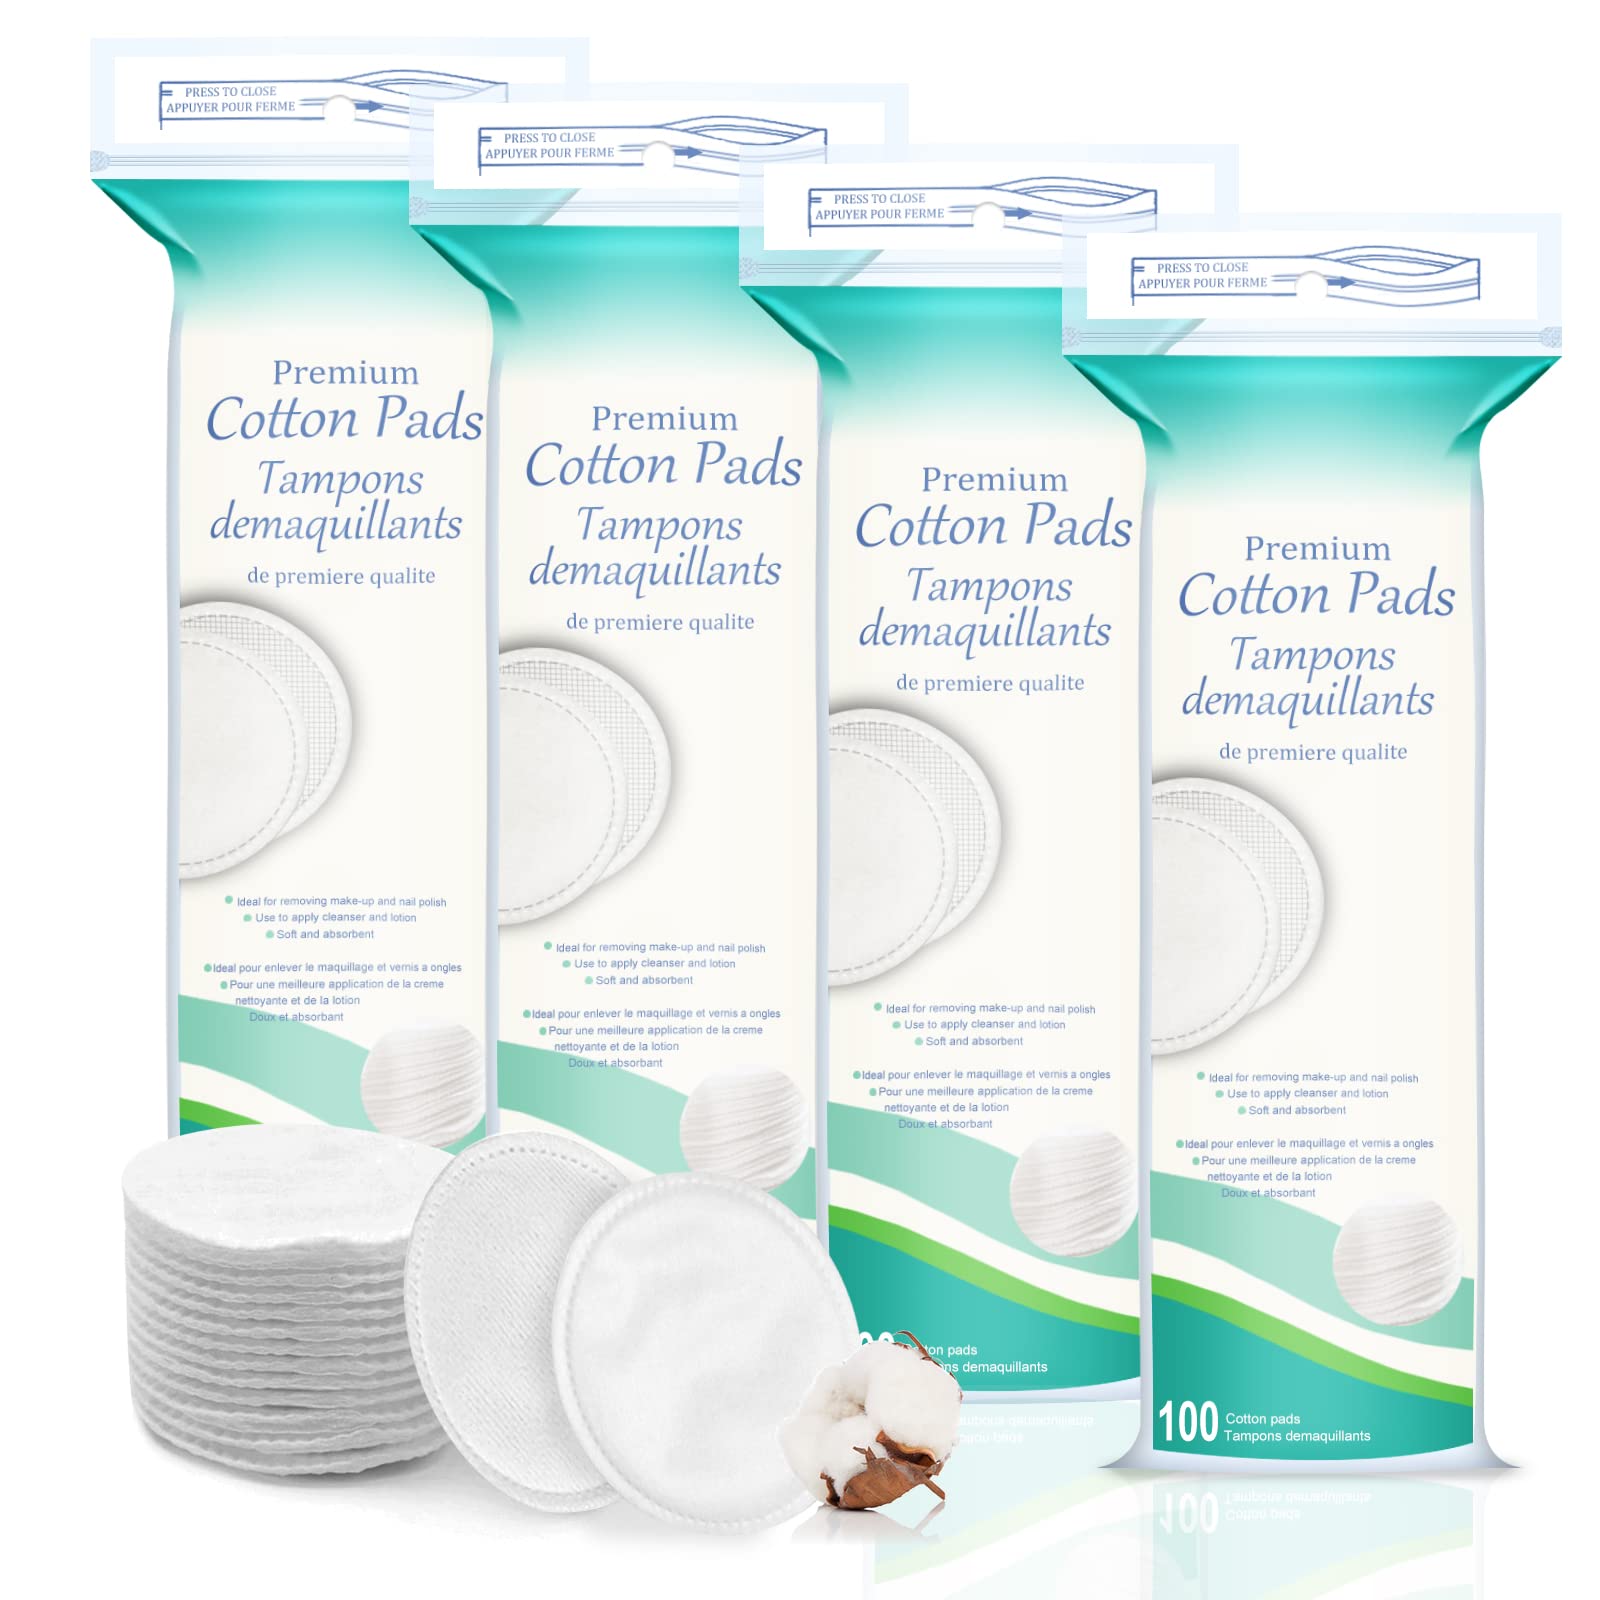 Cotton Pads - Buy Korean and Japanese Skin Care Products Australia